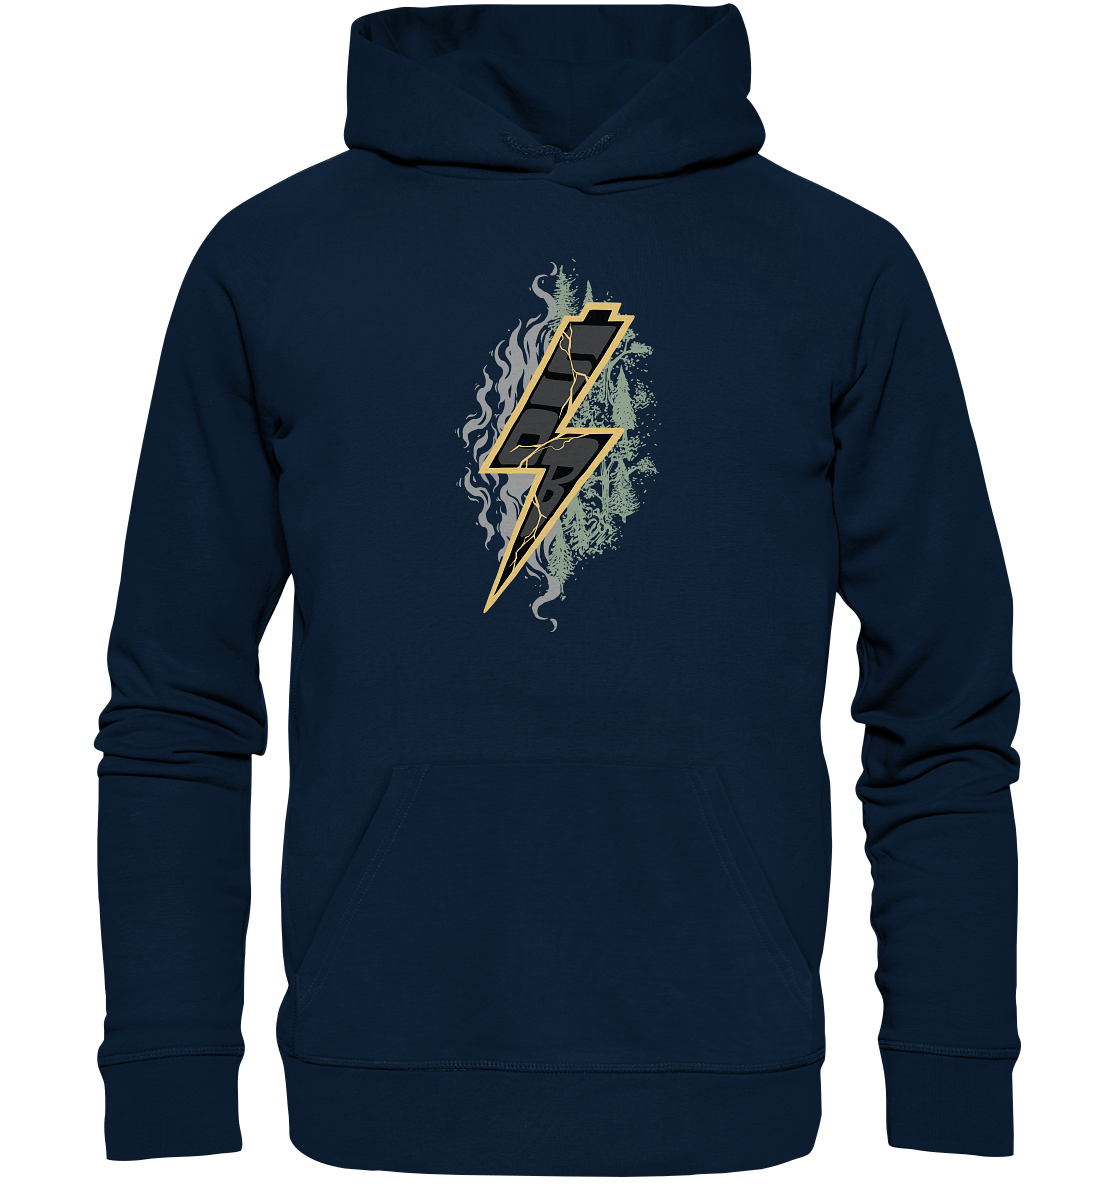 Sons of Battery® - E-MTB Brand & Community Hoodies French Navy / XS Sob "Shred or Alive" Front - Organic Hoodie (Flip Label) E-Bike-Community